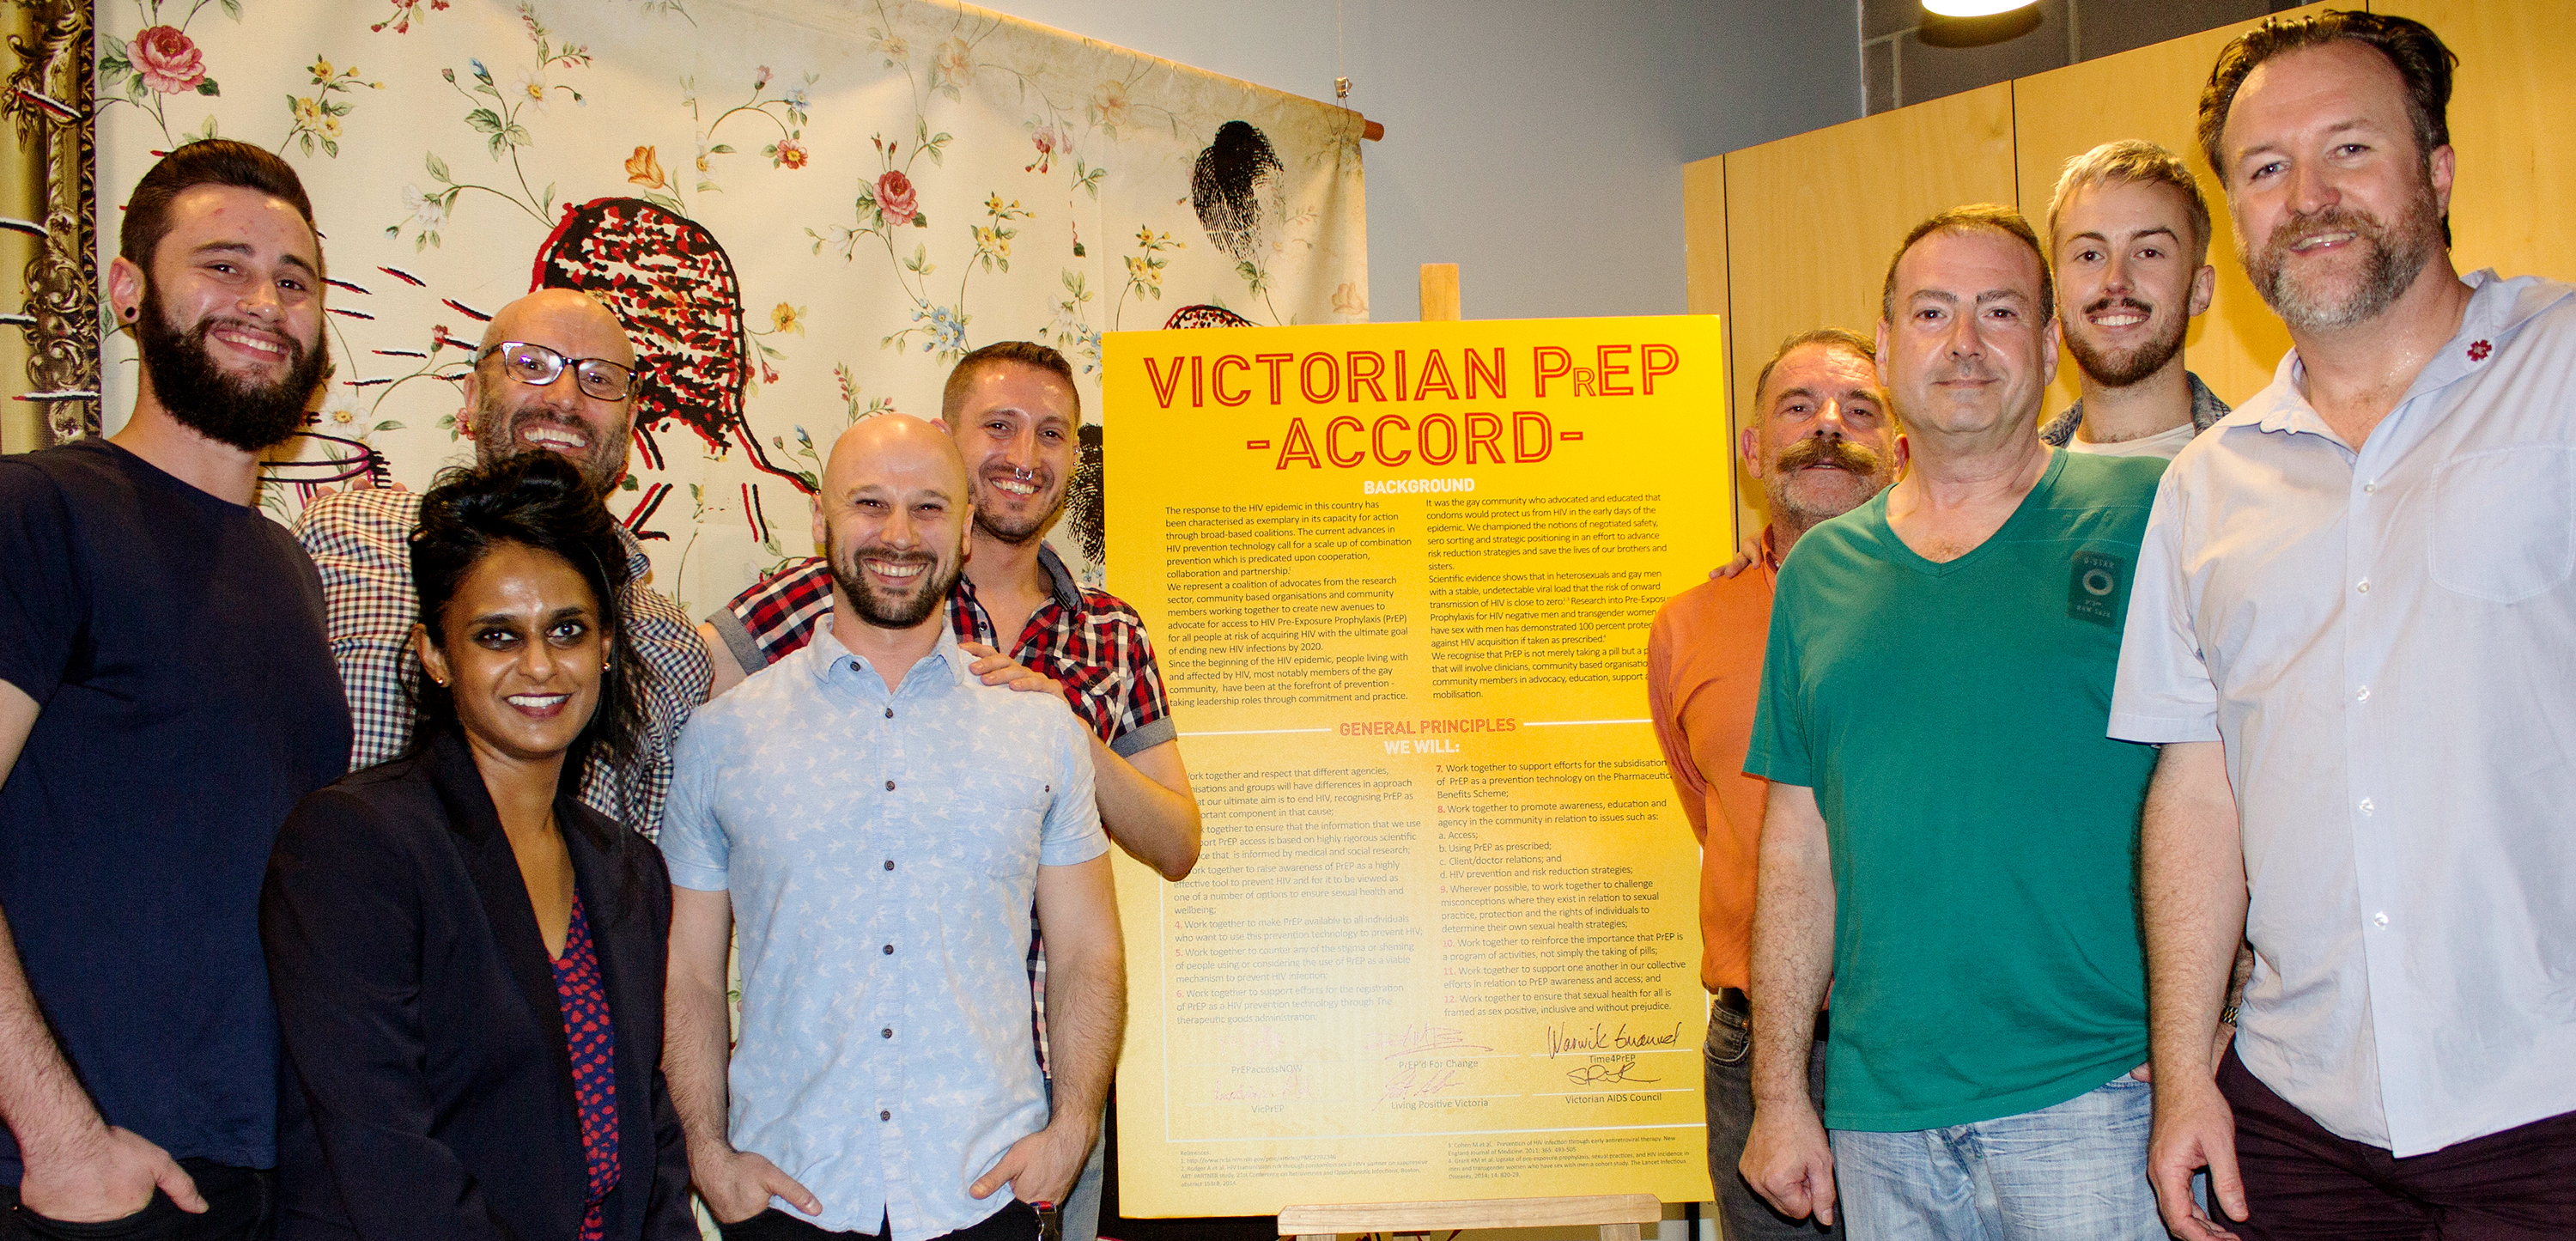 Victorian HIV organisations, advocates, and researchers sign historic accord on PrEP